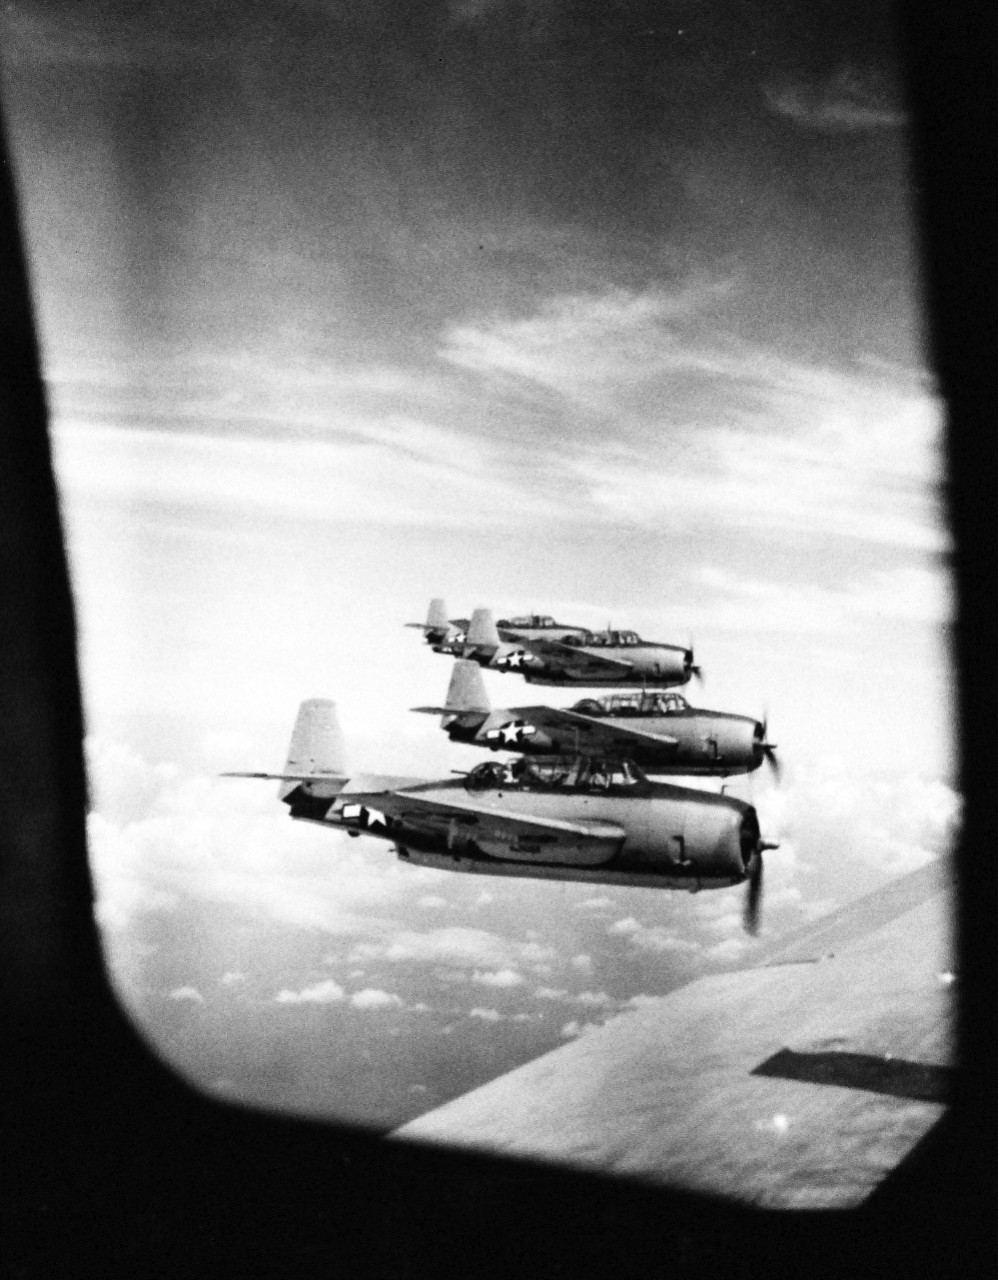 127-GW-530-121884:   Okinawa Campaign, U.S. Naval Gunfire Support, April-June 1945.  U.S. Marine Corps TBF “Avengers” over the Pacific.  Planes of a Marine torpedo bomber squadron seen through the escape hatch of a transport, en route to recently captured airfields on Okinawa.   Photographed by Master Sergeant C.L. Jansson, 25 April 1945.  Official U.S. Marine Corps Photograph, now in the collections of the National Archives.   (2014/6/25). 